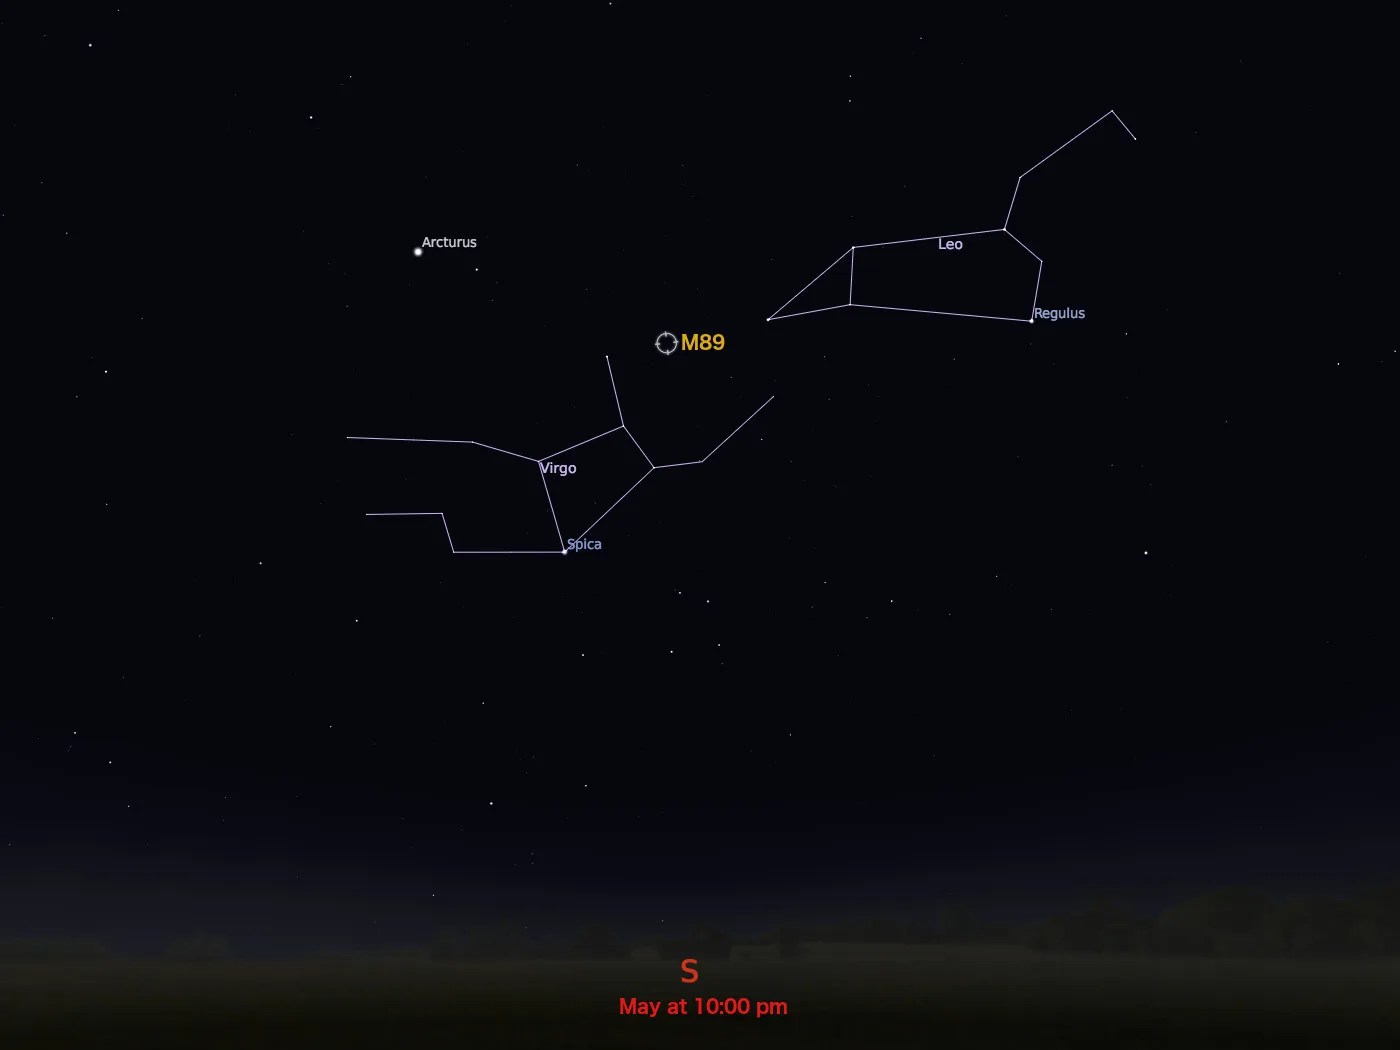 star chart showing location in night sky of M89